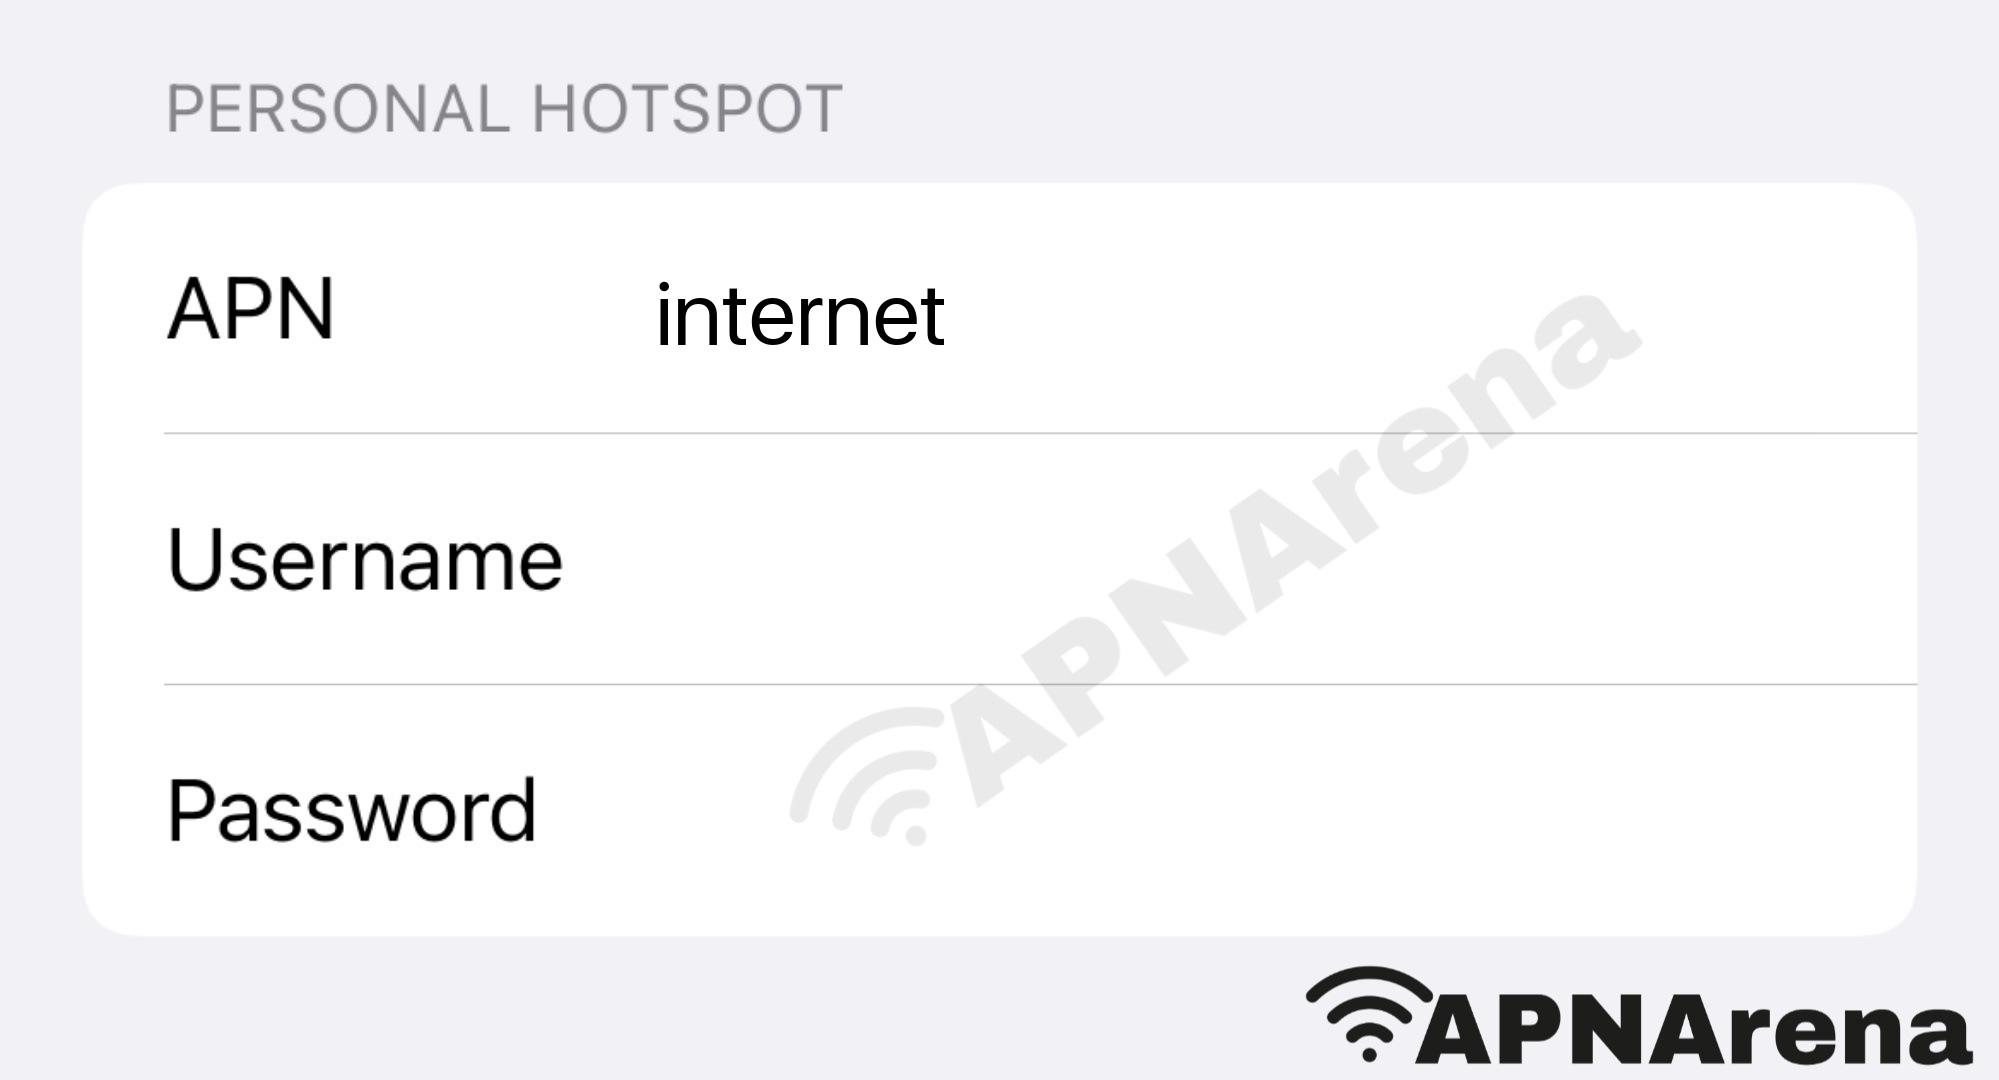 CHIPPIE Curaçao Personal Hotspot Settings for iPhone